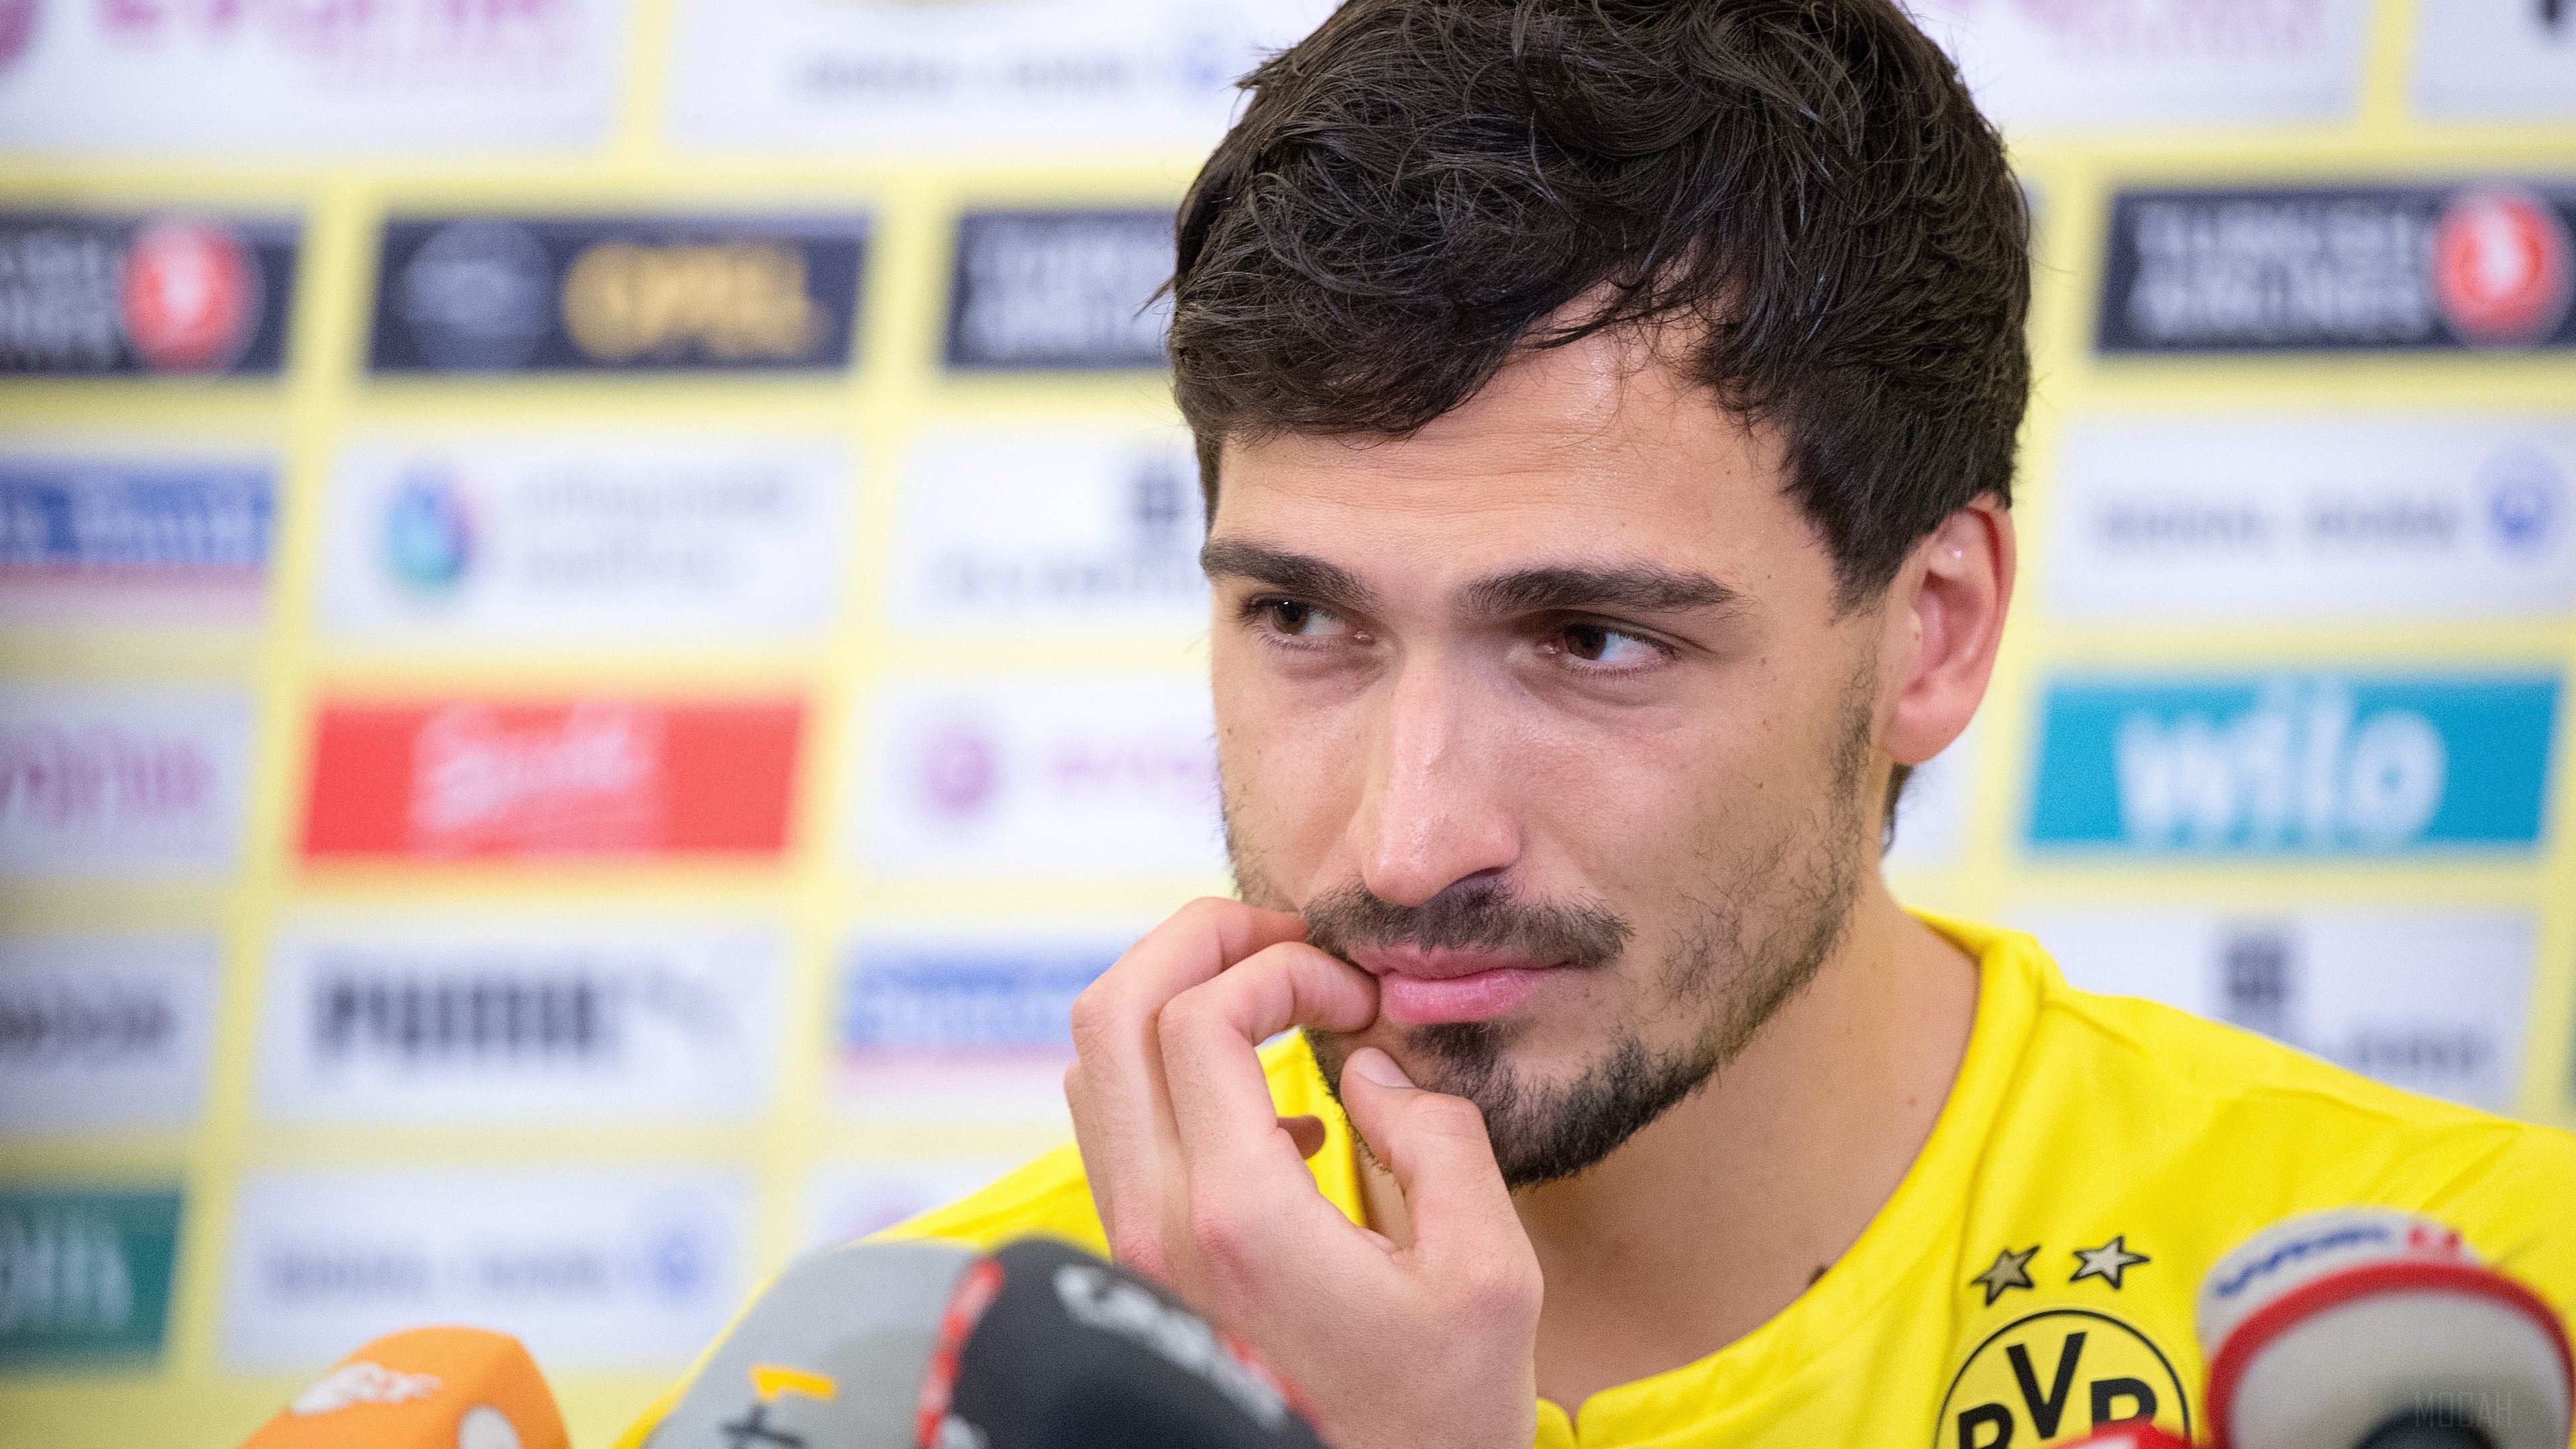 Mats hummels p k k hd wallpapers backgrounds free download rare gallery